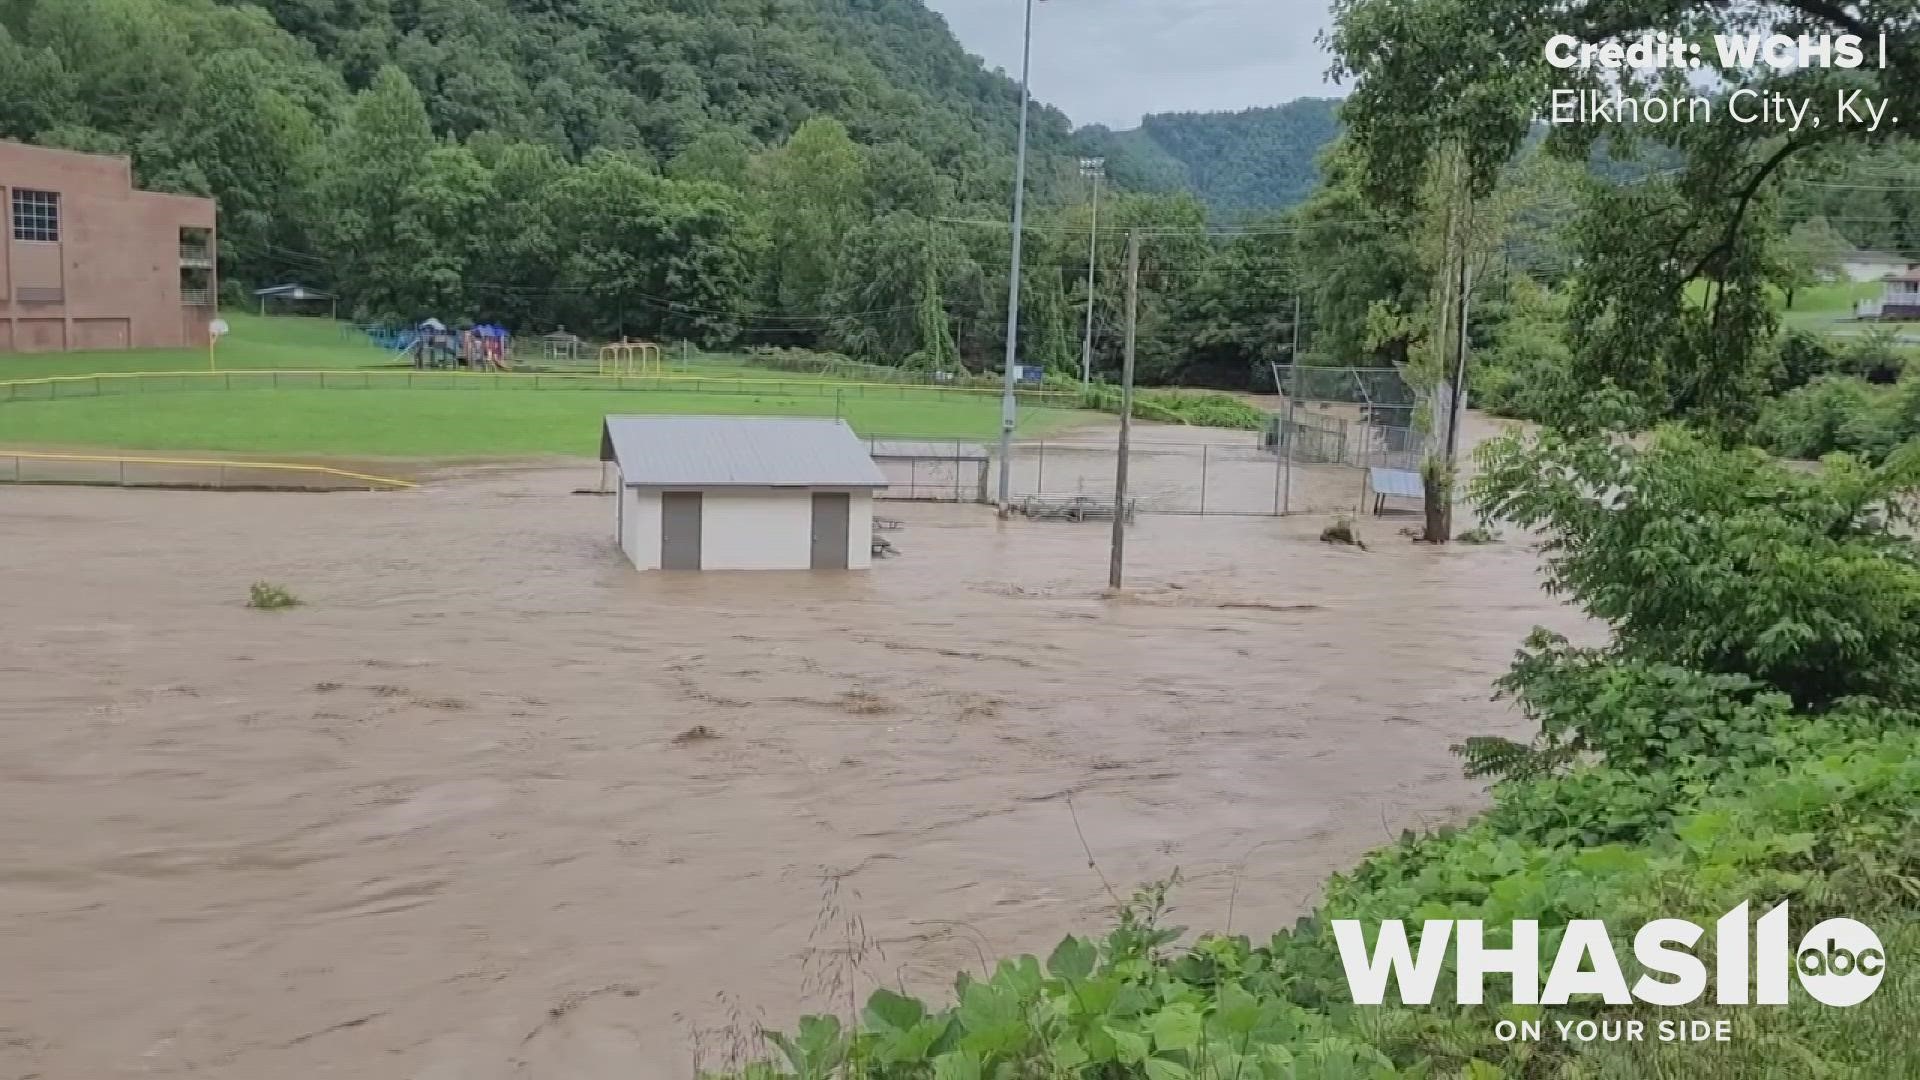 More heart-wrenching video of "catastrophic" flooding in eastern Kentucky. Governor Andy Beshear said Thursday three people have died.